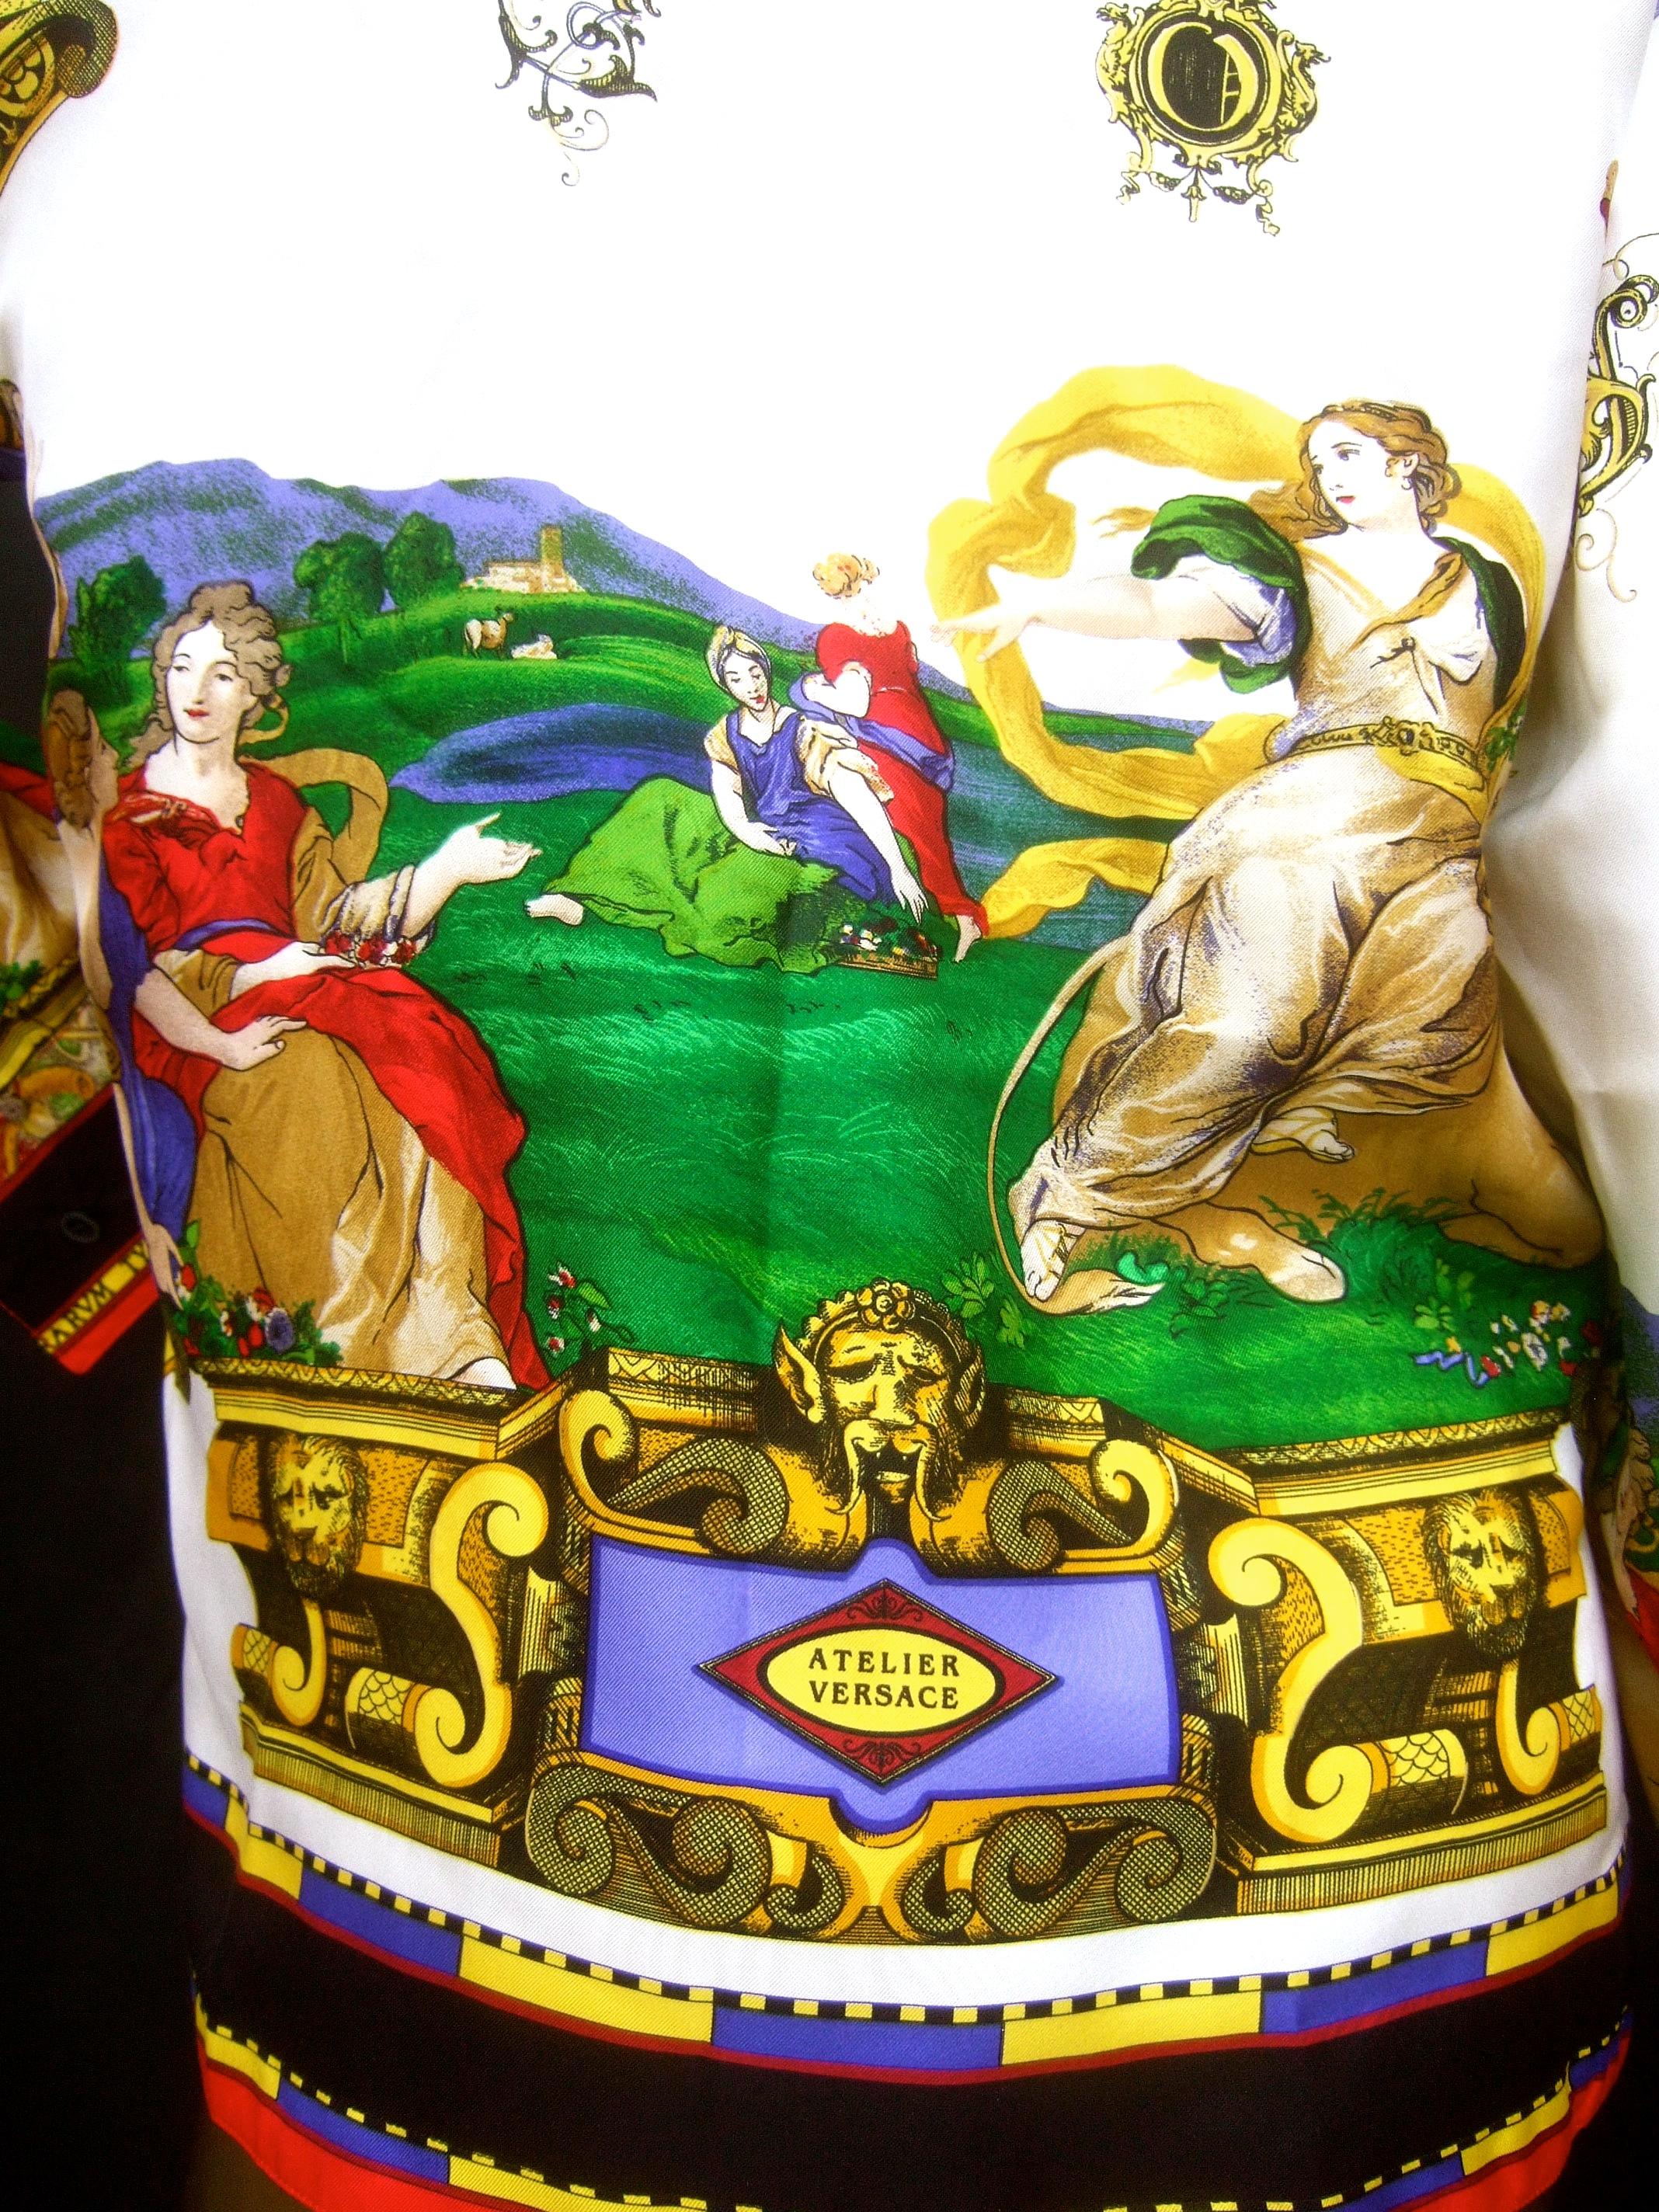 Gianni Versace Italian Graphic Design Silk Blouse circa 1990s In Excellent Condition For Sale In University City, MO